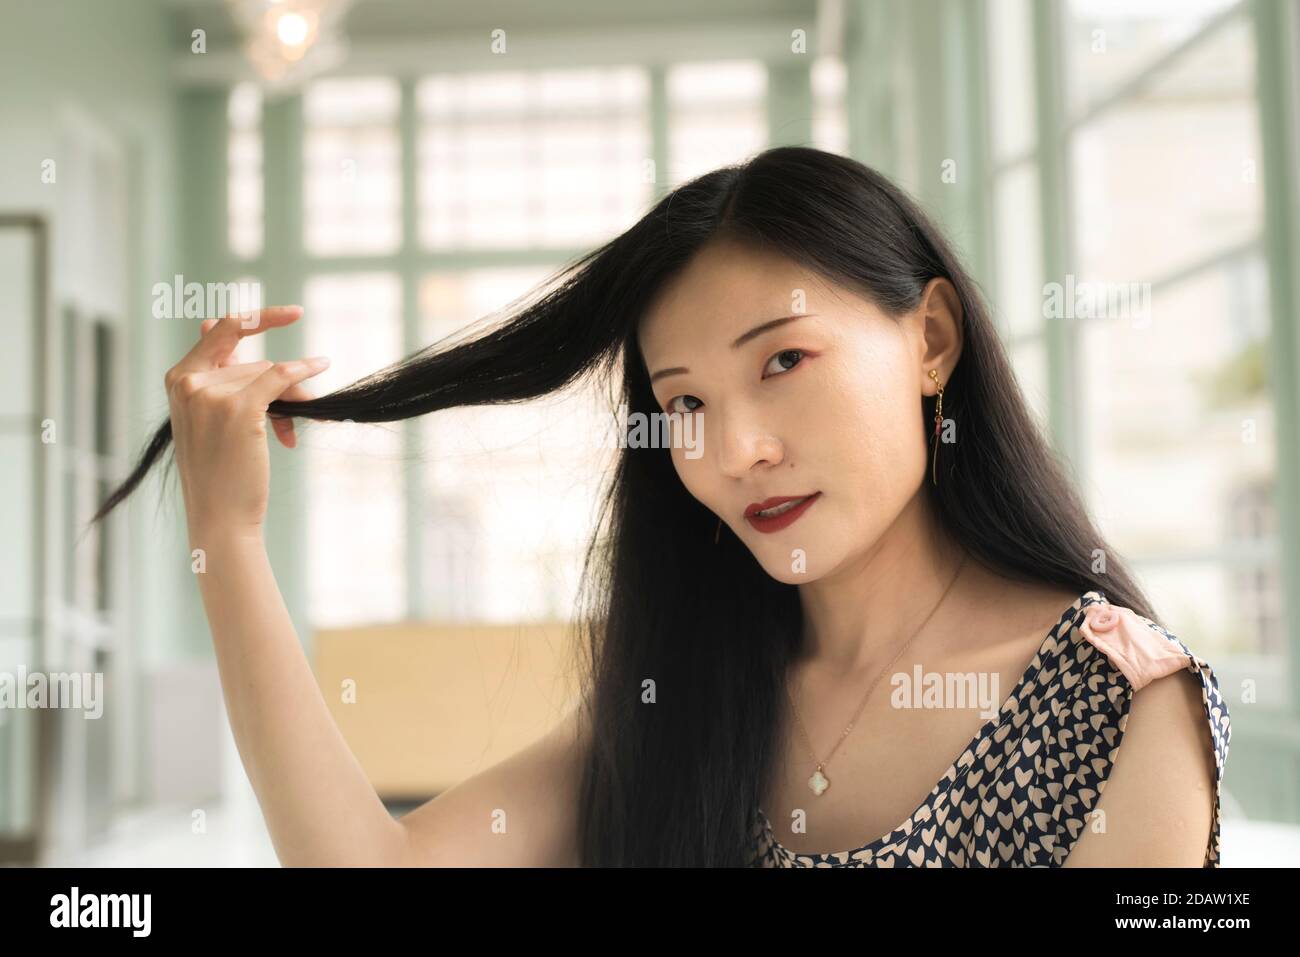 A chinese woman holding her hair inside a sitting room within the walters art museum in baltimore maryland. Stock Photo